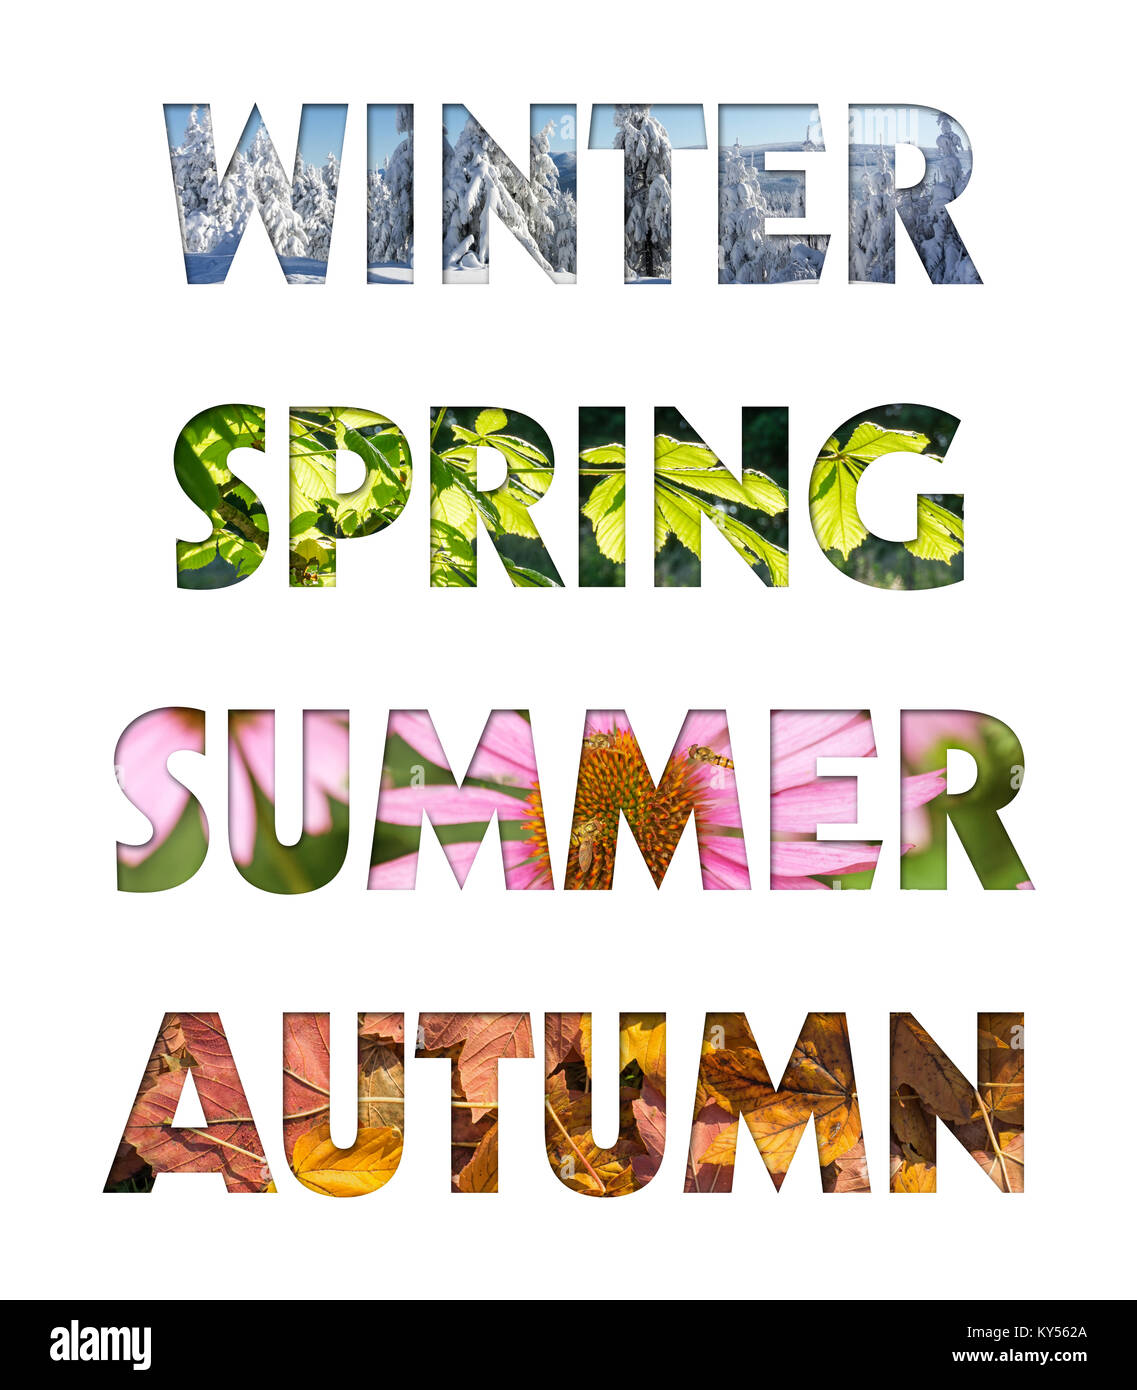 Captions winter, spring, summer, autumn from four seasons photos for calendar, flyer, poster, postcard. Four seasons colors. Stock Photo